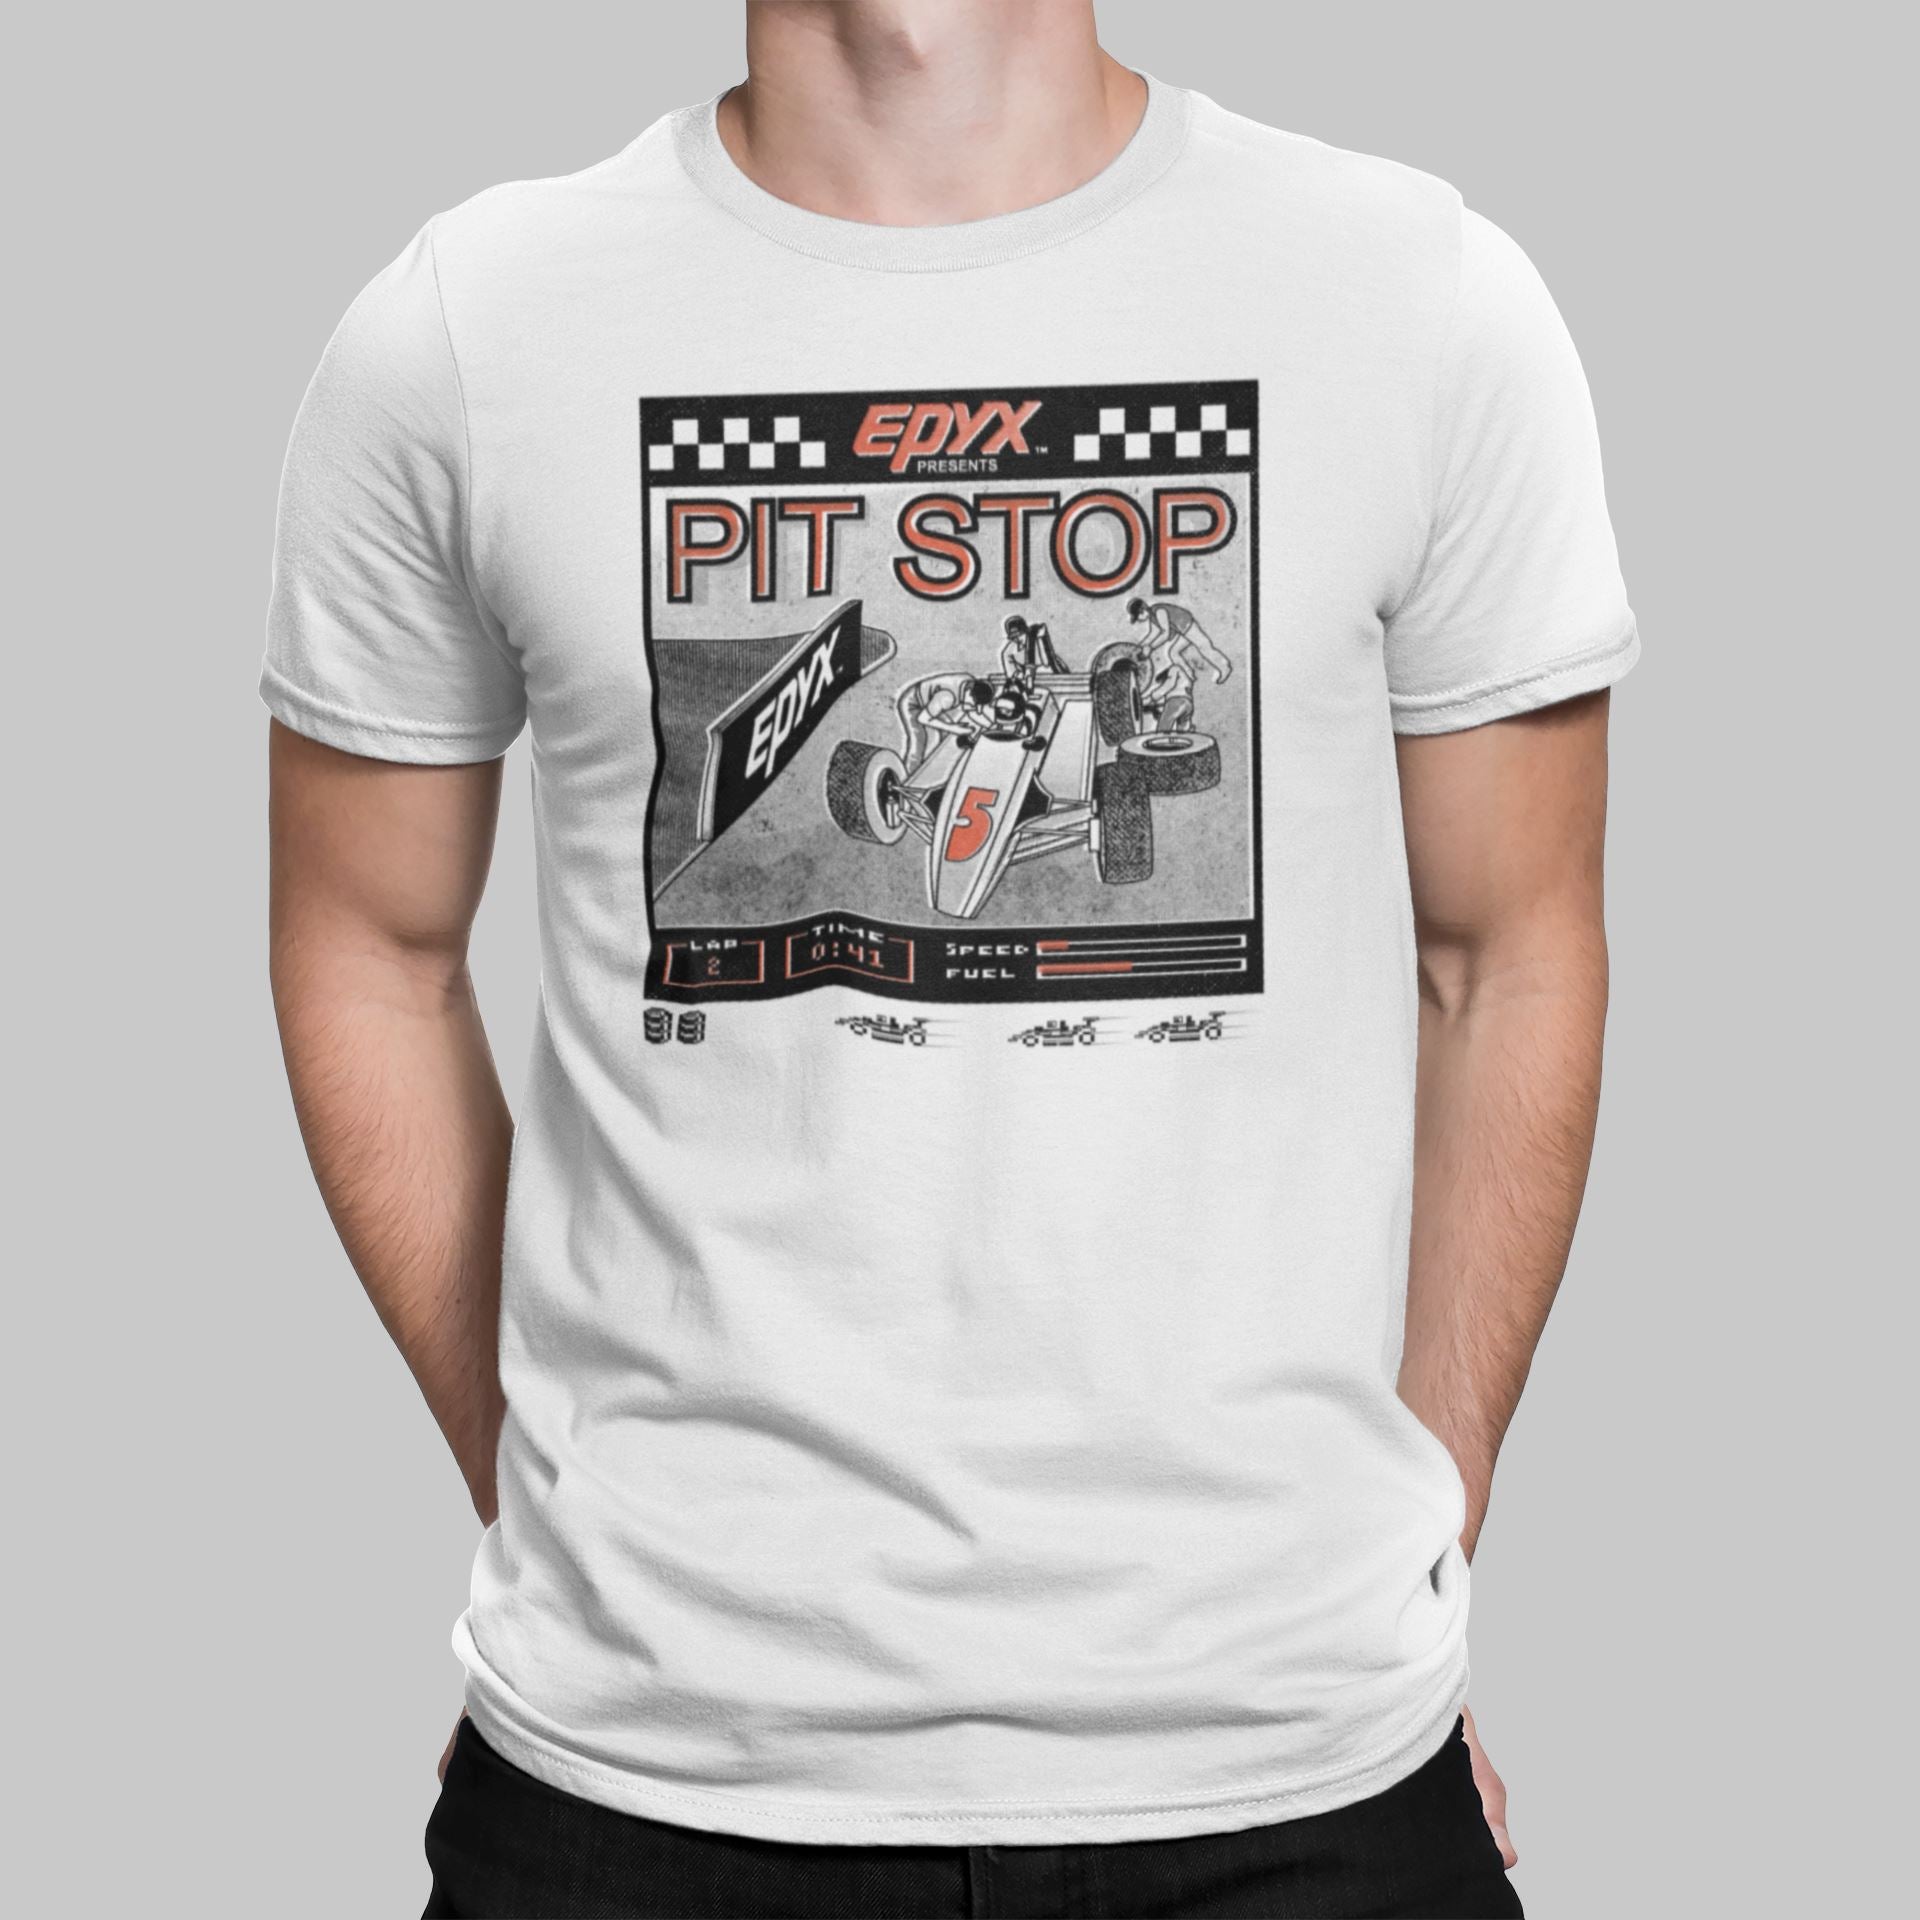 Pit Stop Retro Gaming T-Shirt T-Shirt Seven Squared Small 34-36" White 